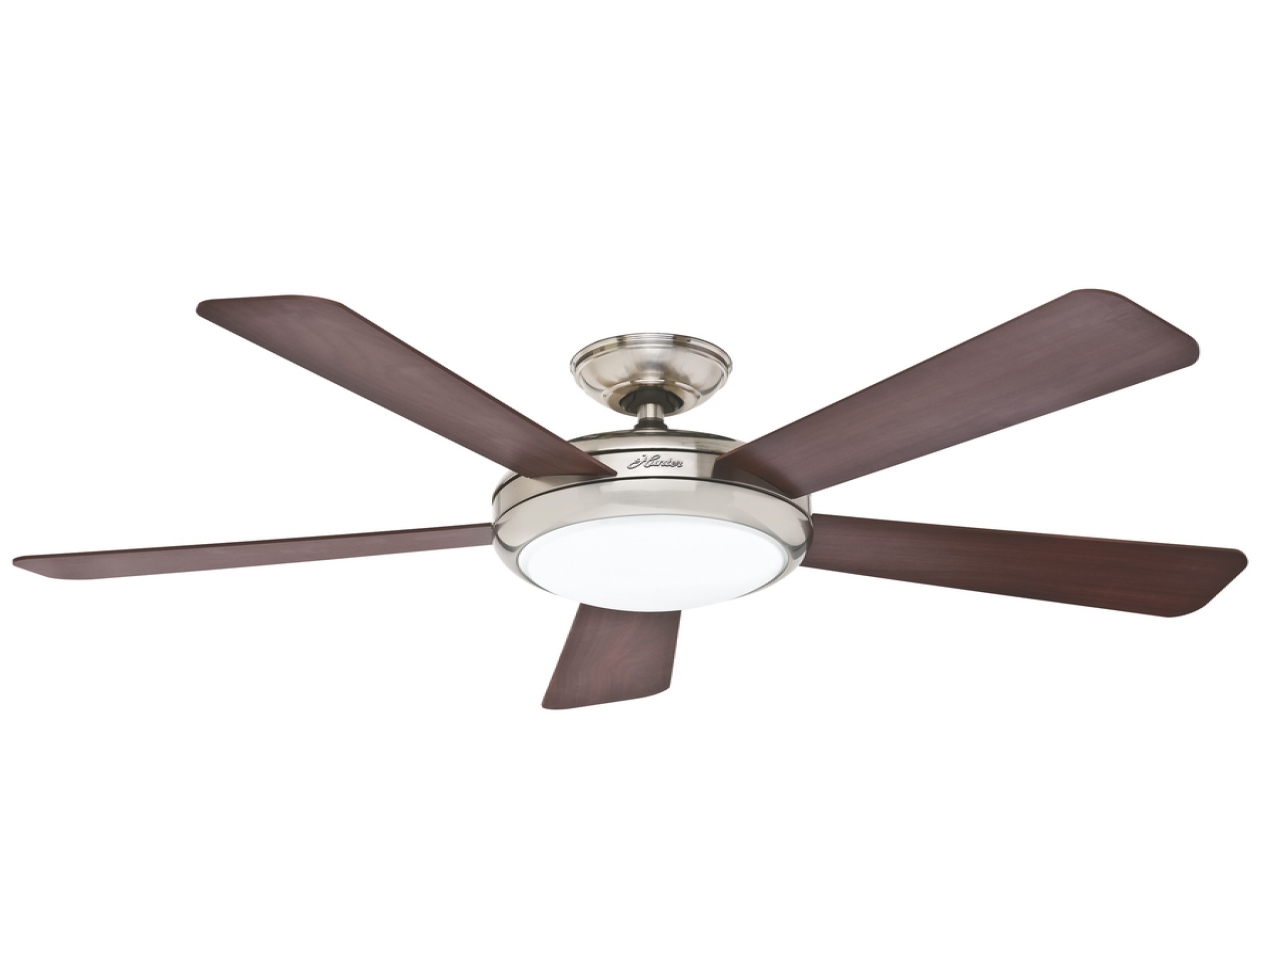 Flush Mount Ceiling Fan With Light Outdoor1280 X 960